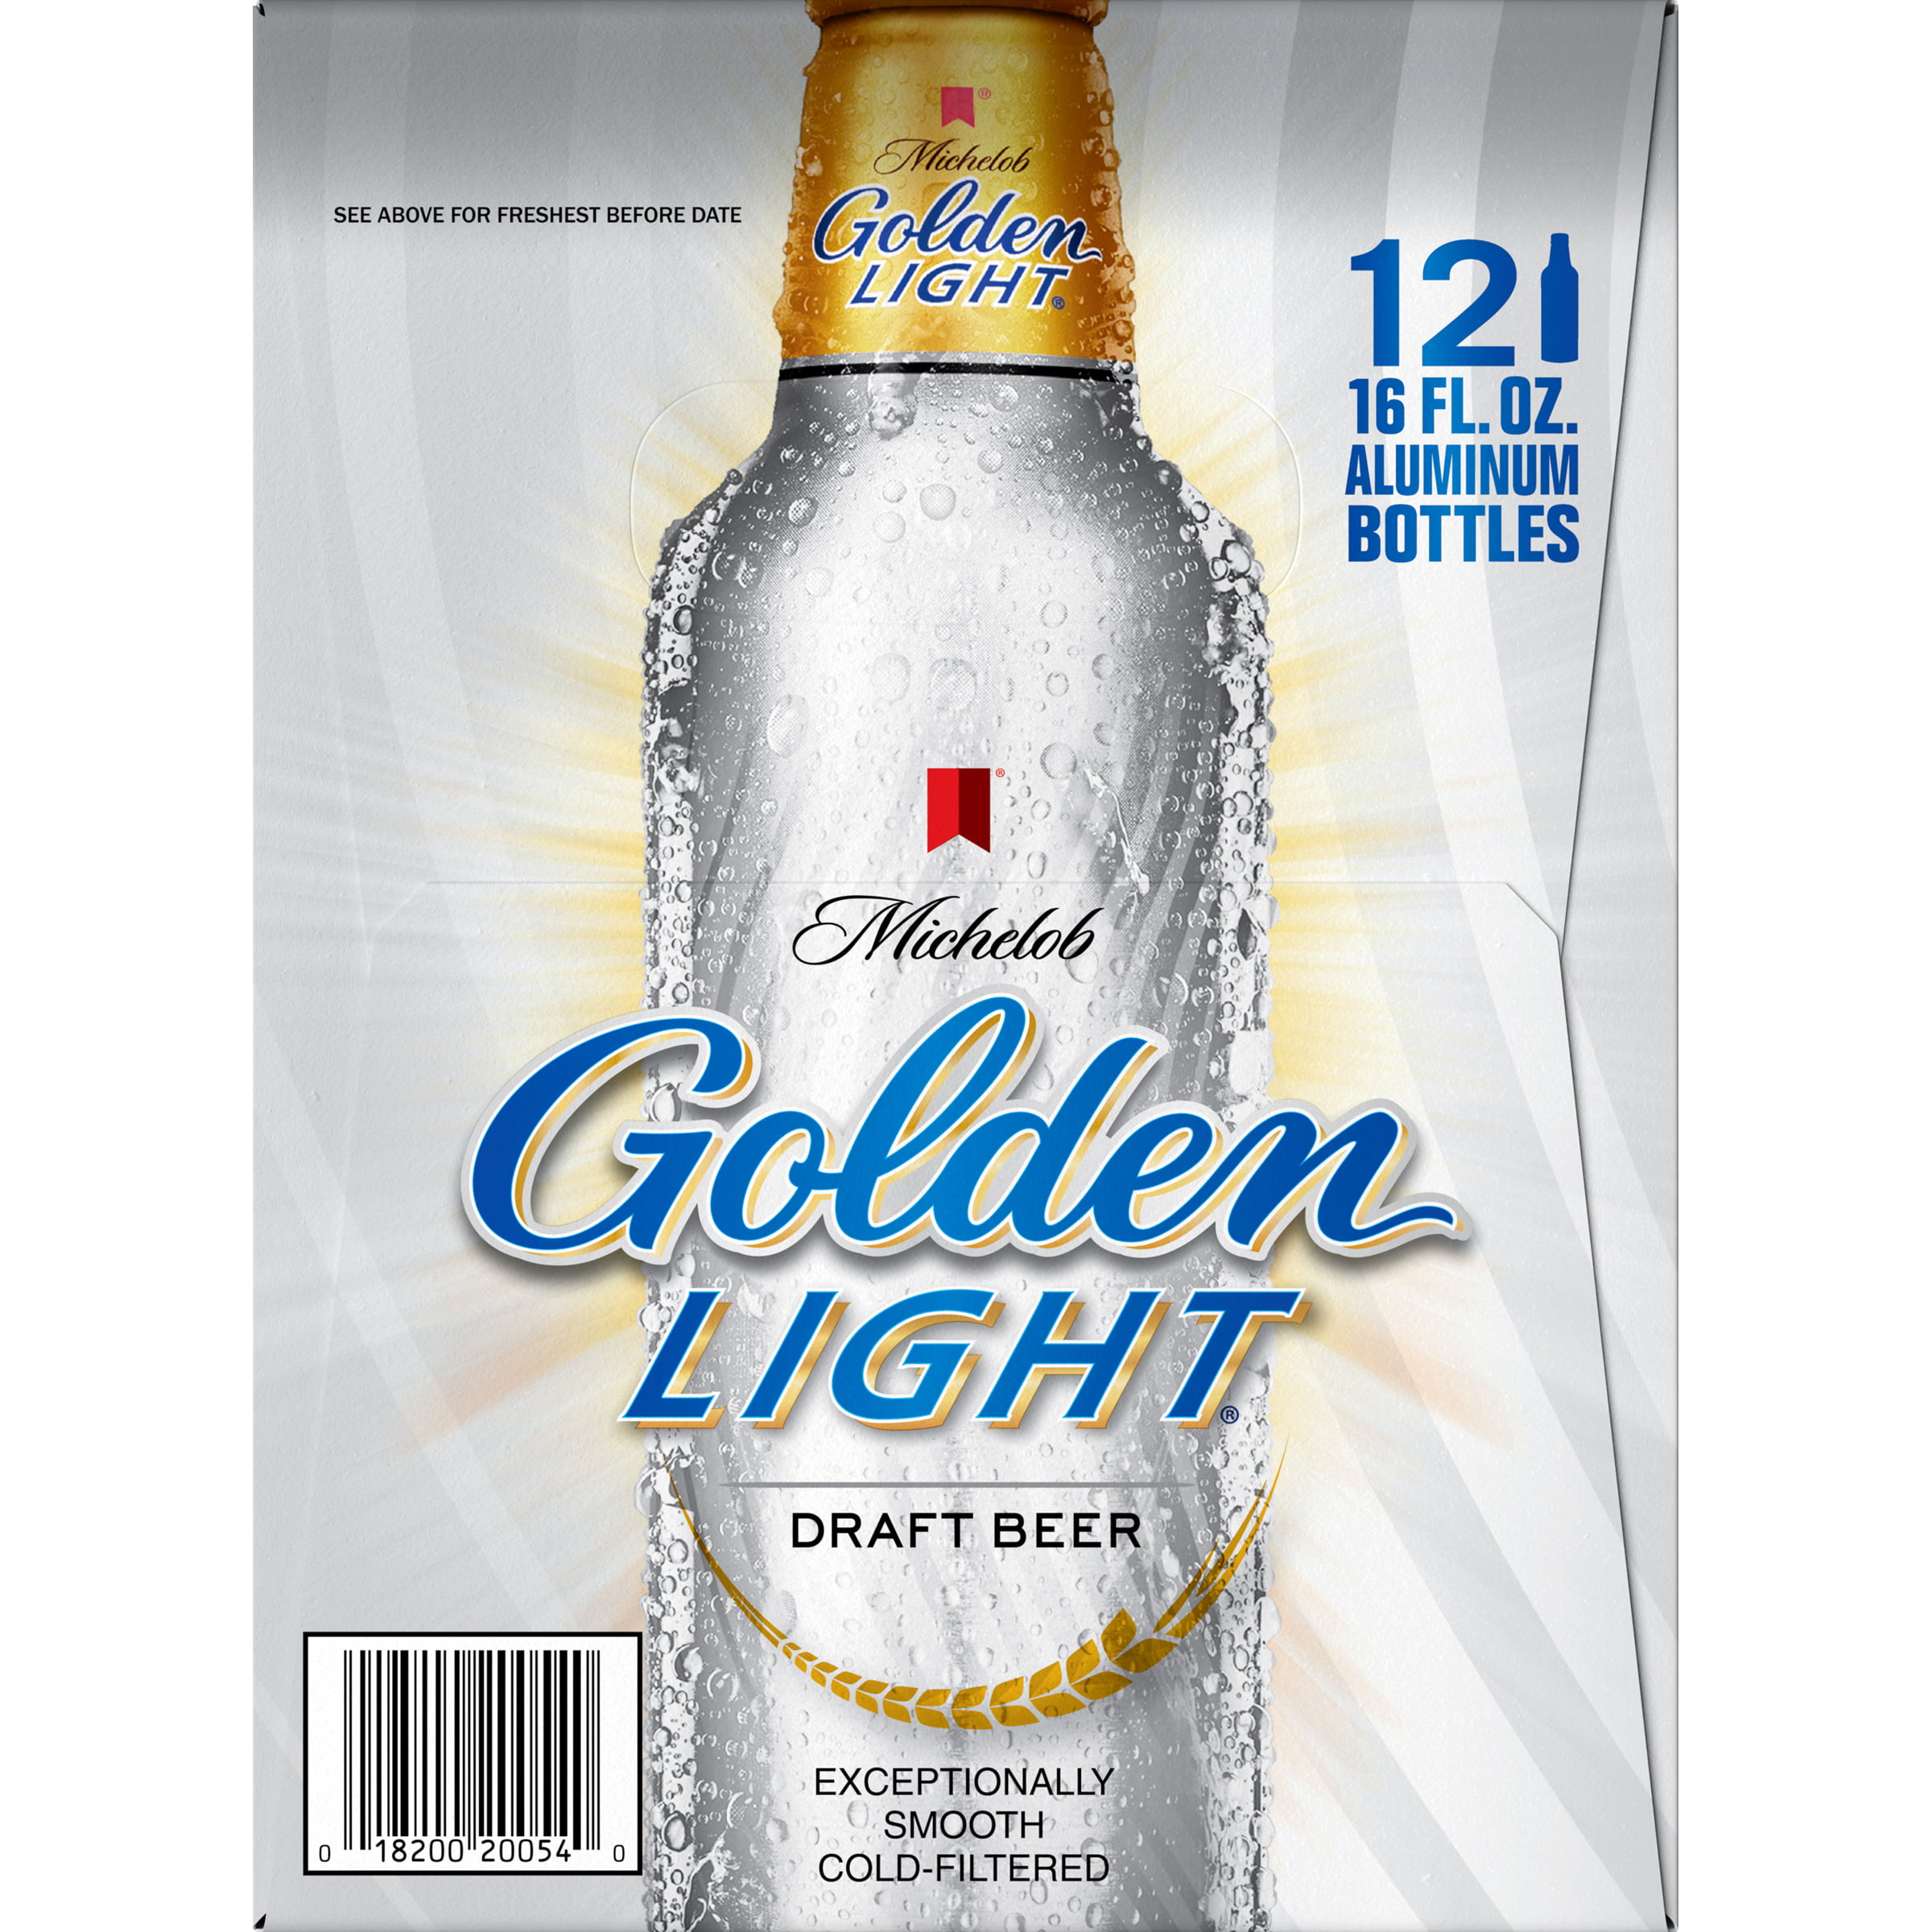 how-many-calories-in-michelob-golden-light-beer-shelly-lighting